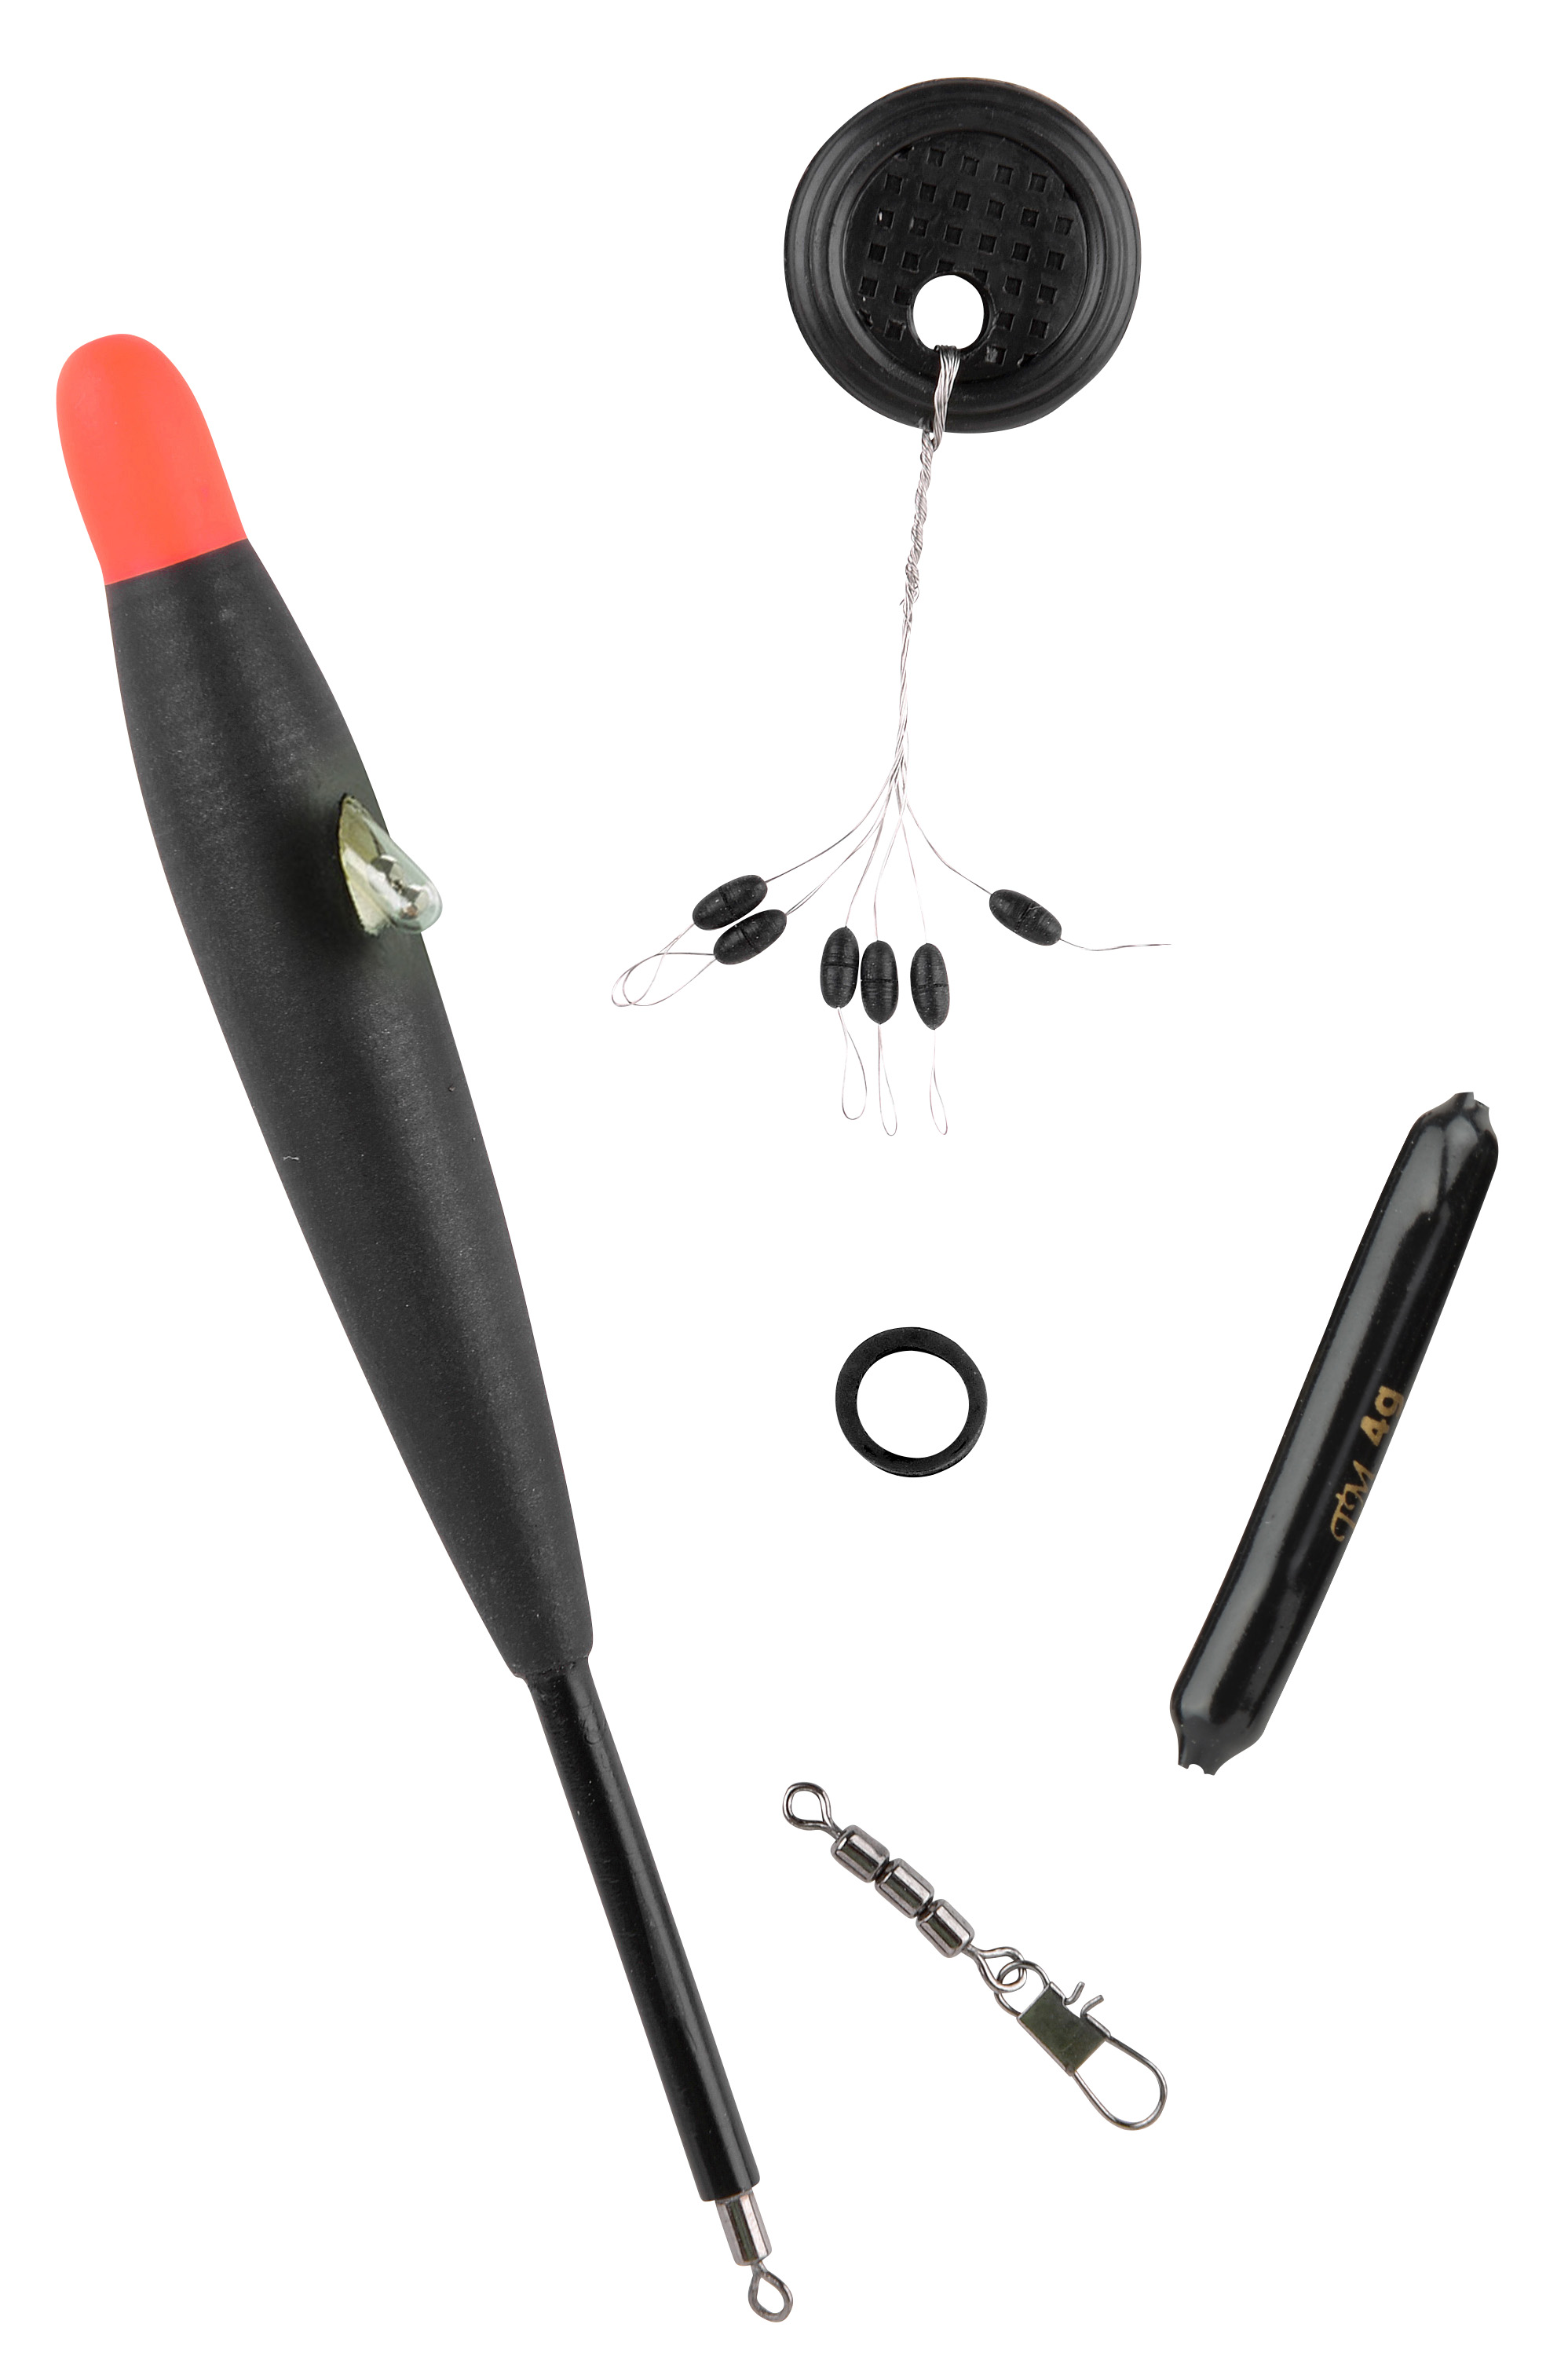 Spro Trout Master Turbo Rattle Lead Set